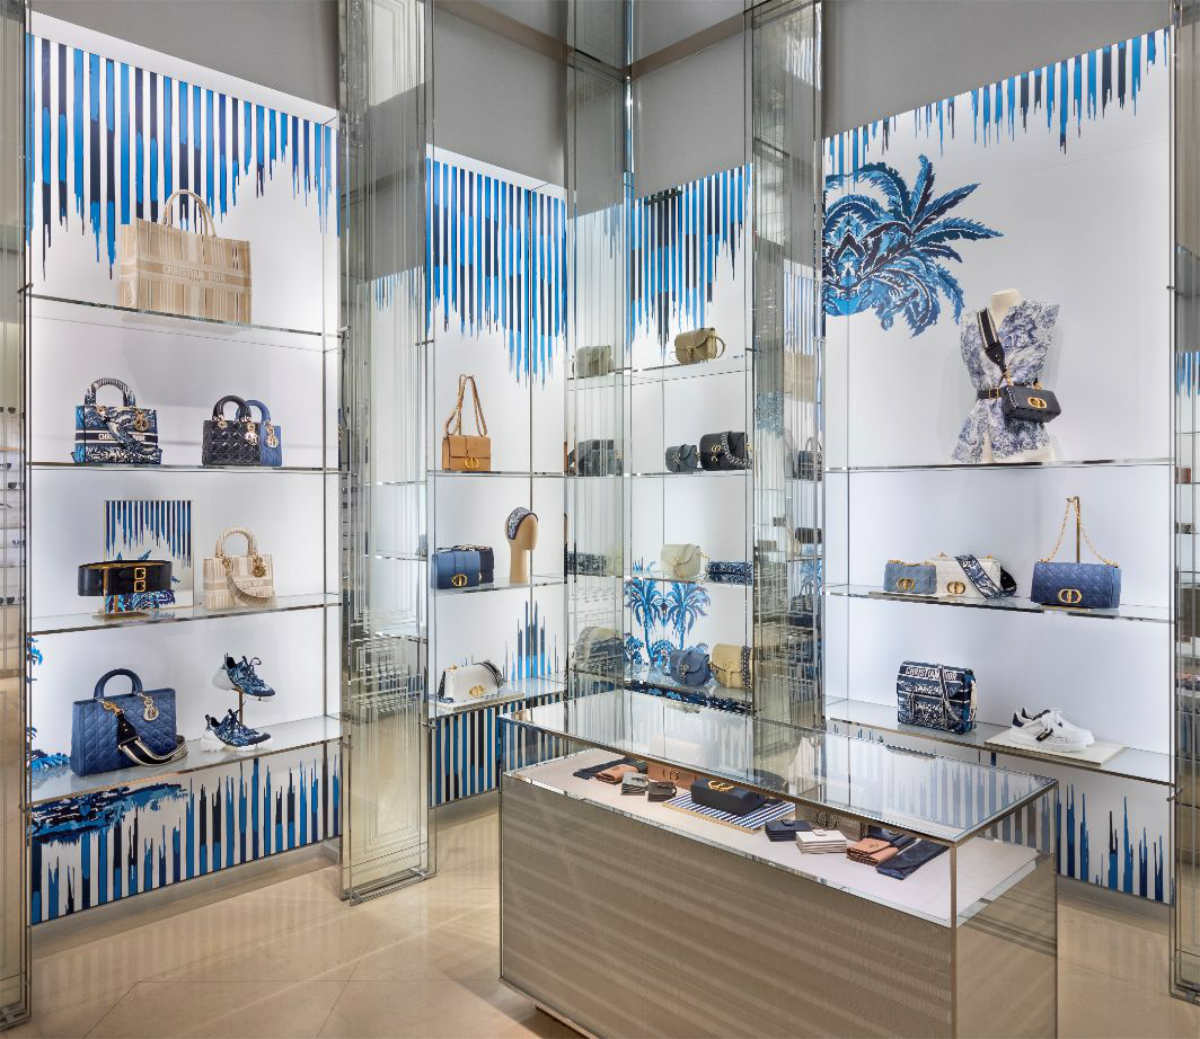 Dior Unveiled Its New Sumptuous New York 5th Avenue Boutique